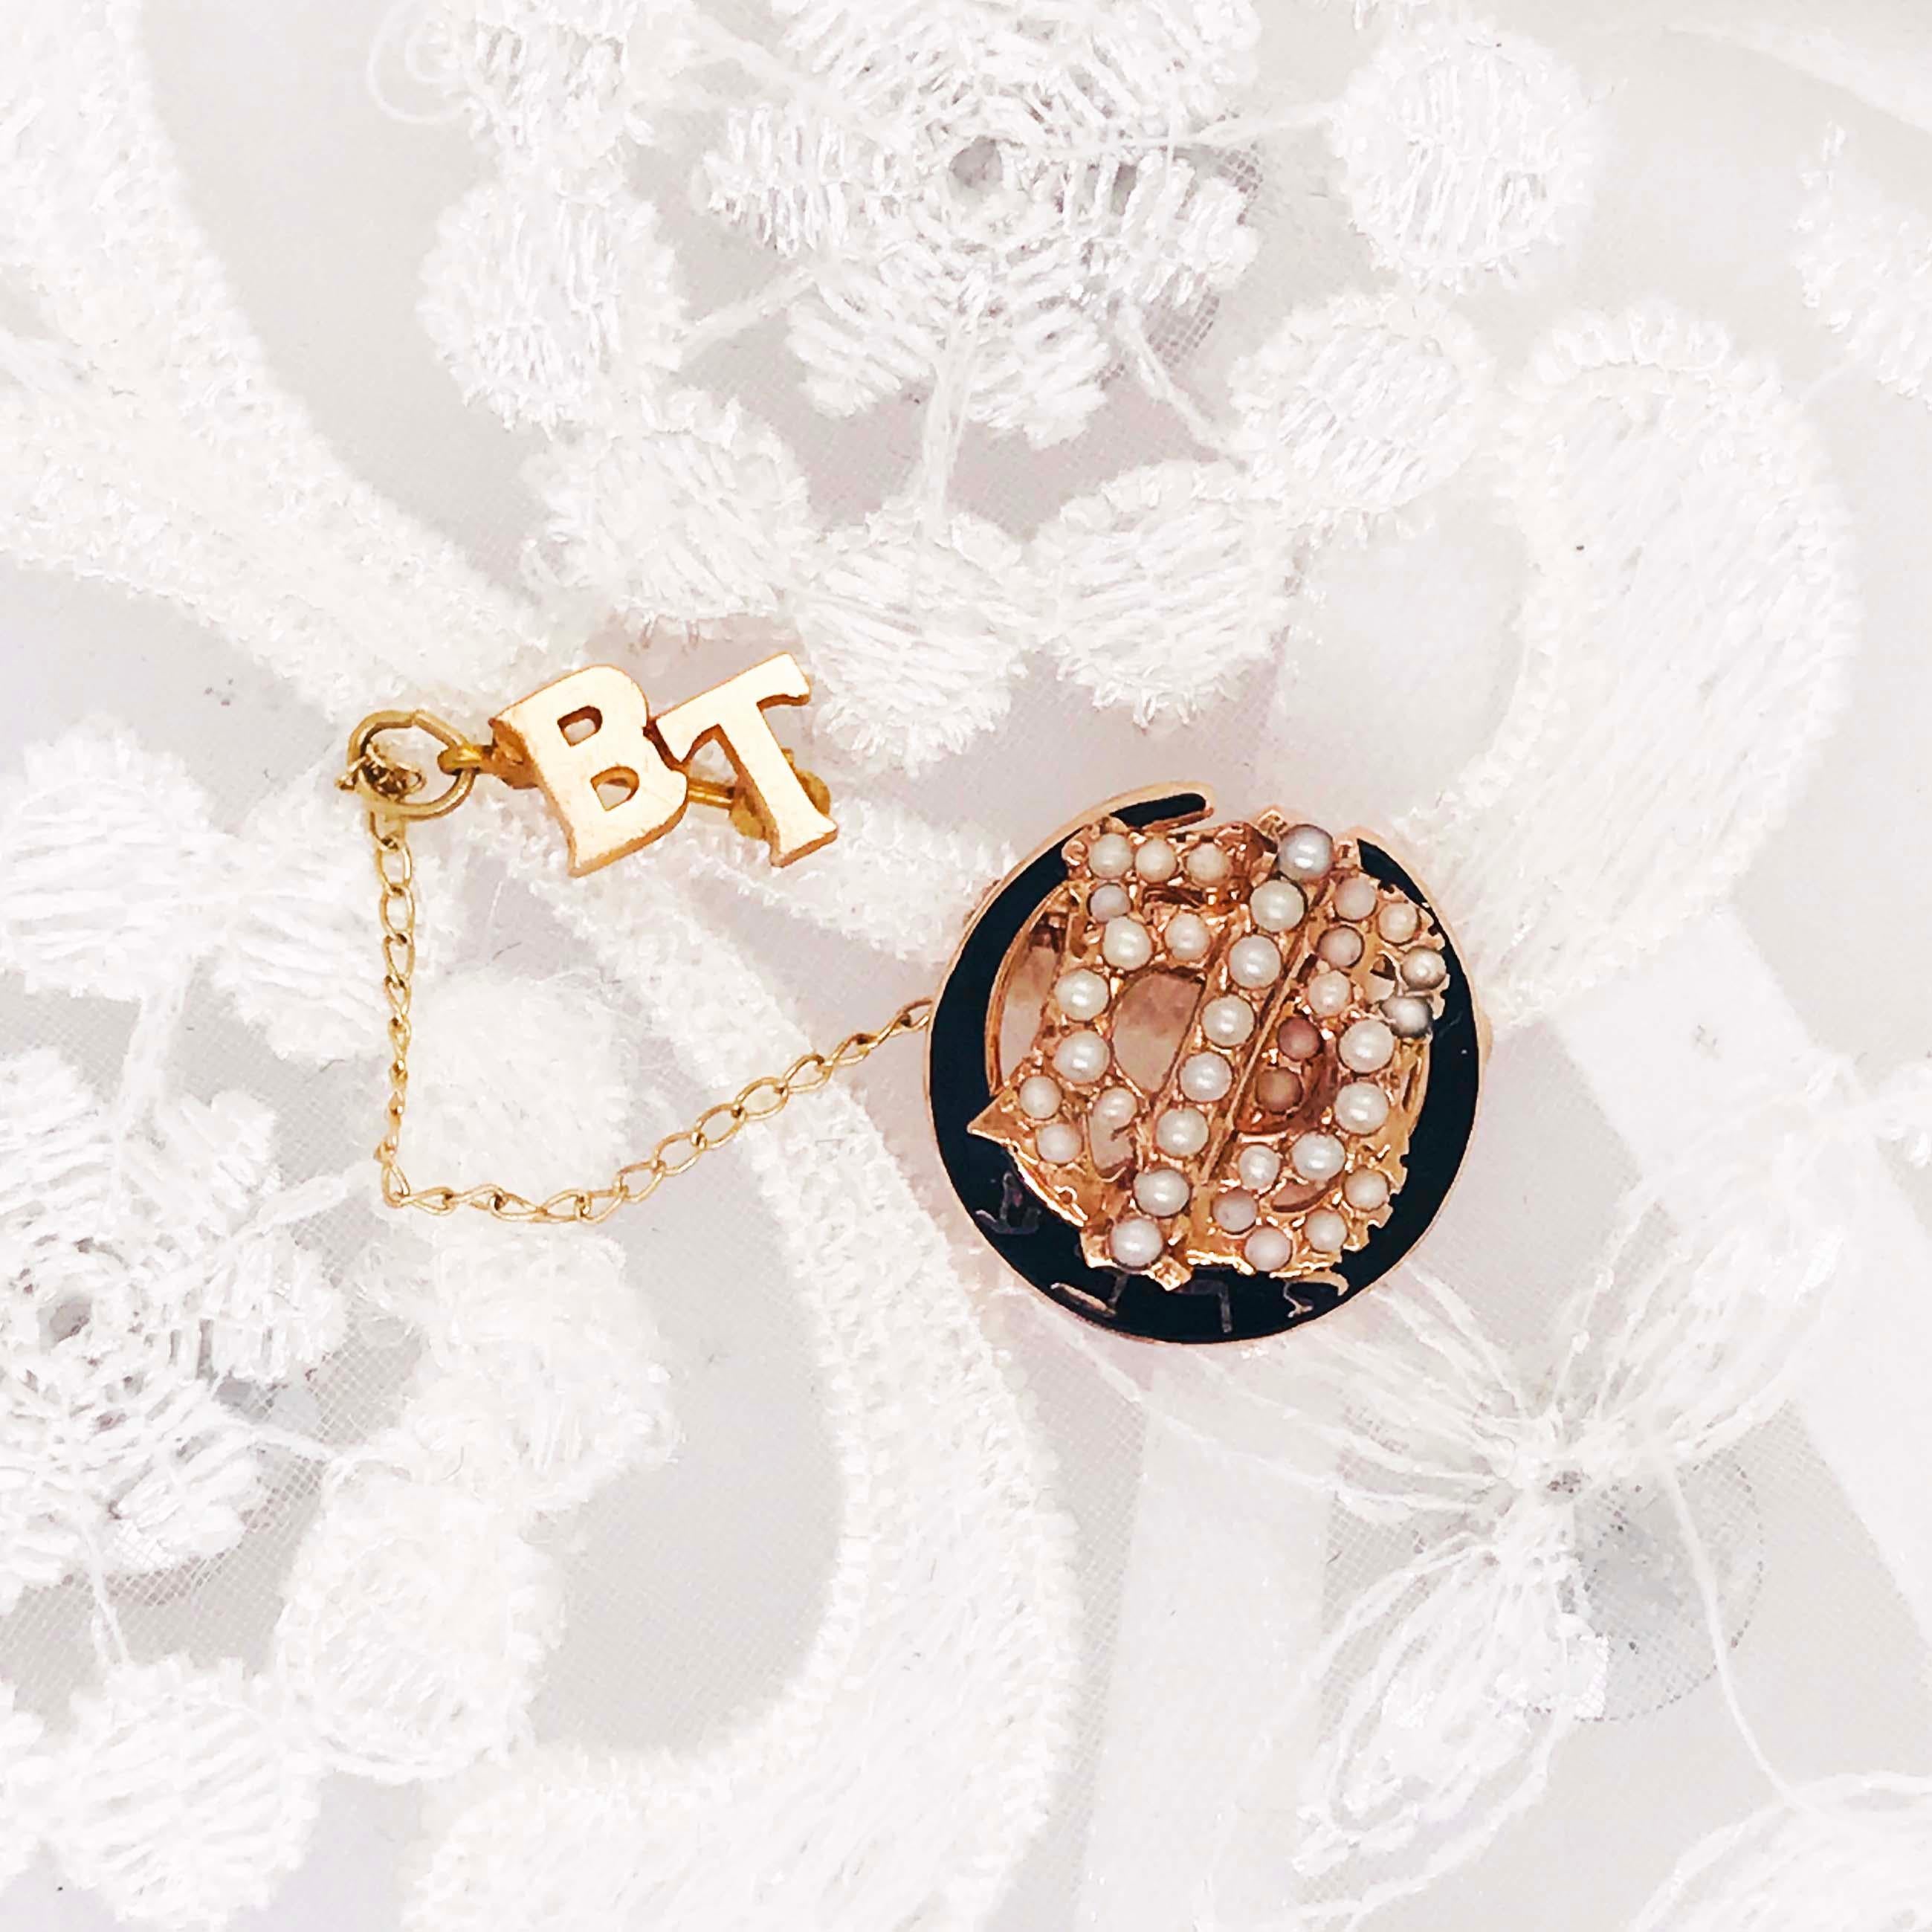 The Gamma Phi Beta Sorority pin from Syracuse University is from 1985. The pin is over 40 years old and is in excellent condition!  All the pearls are the original seed pearls with all the gold and black enamel in beautiful condition.
This Gamma